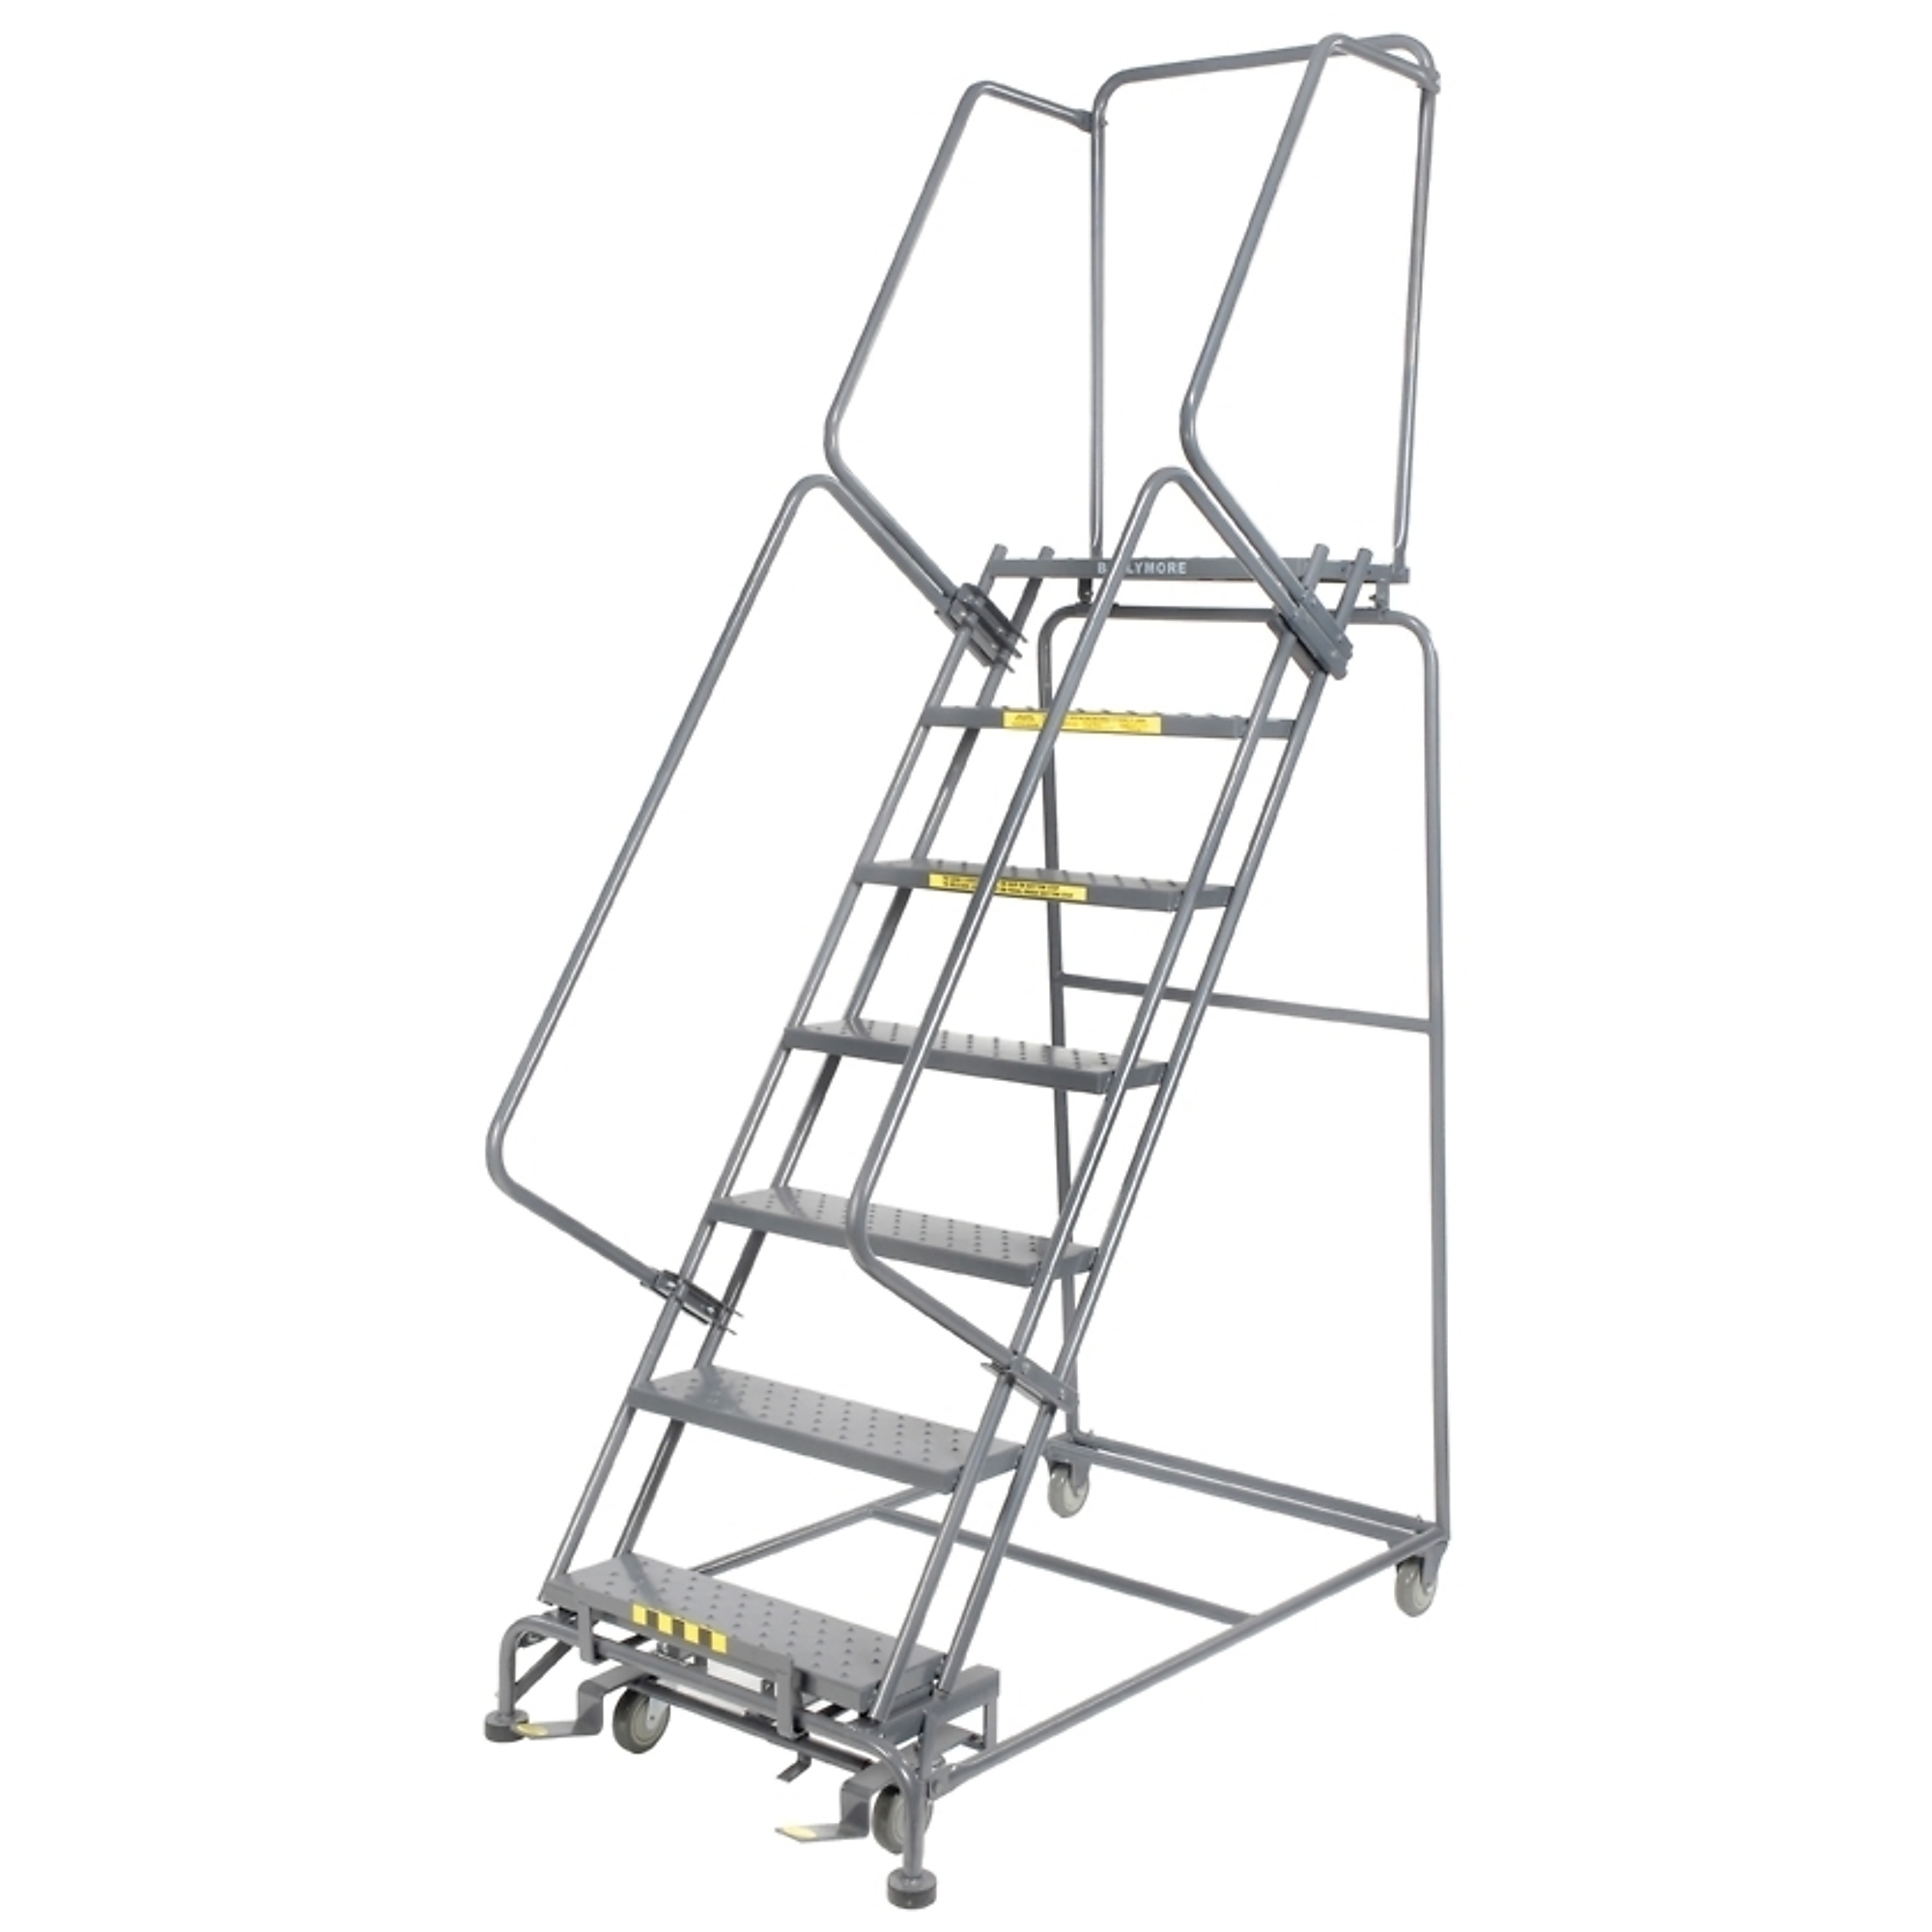 Ballymore, Rolling Ladder, Overall Height 103 in, Steps 7, Material Steel, Model 073214P